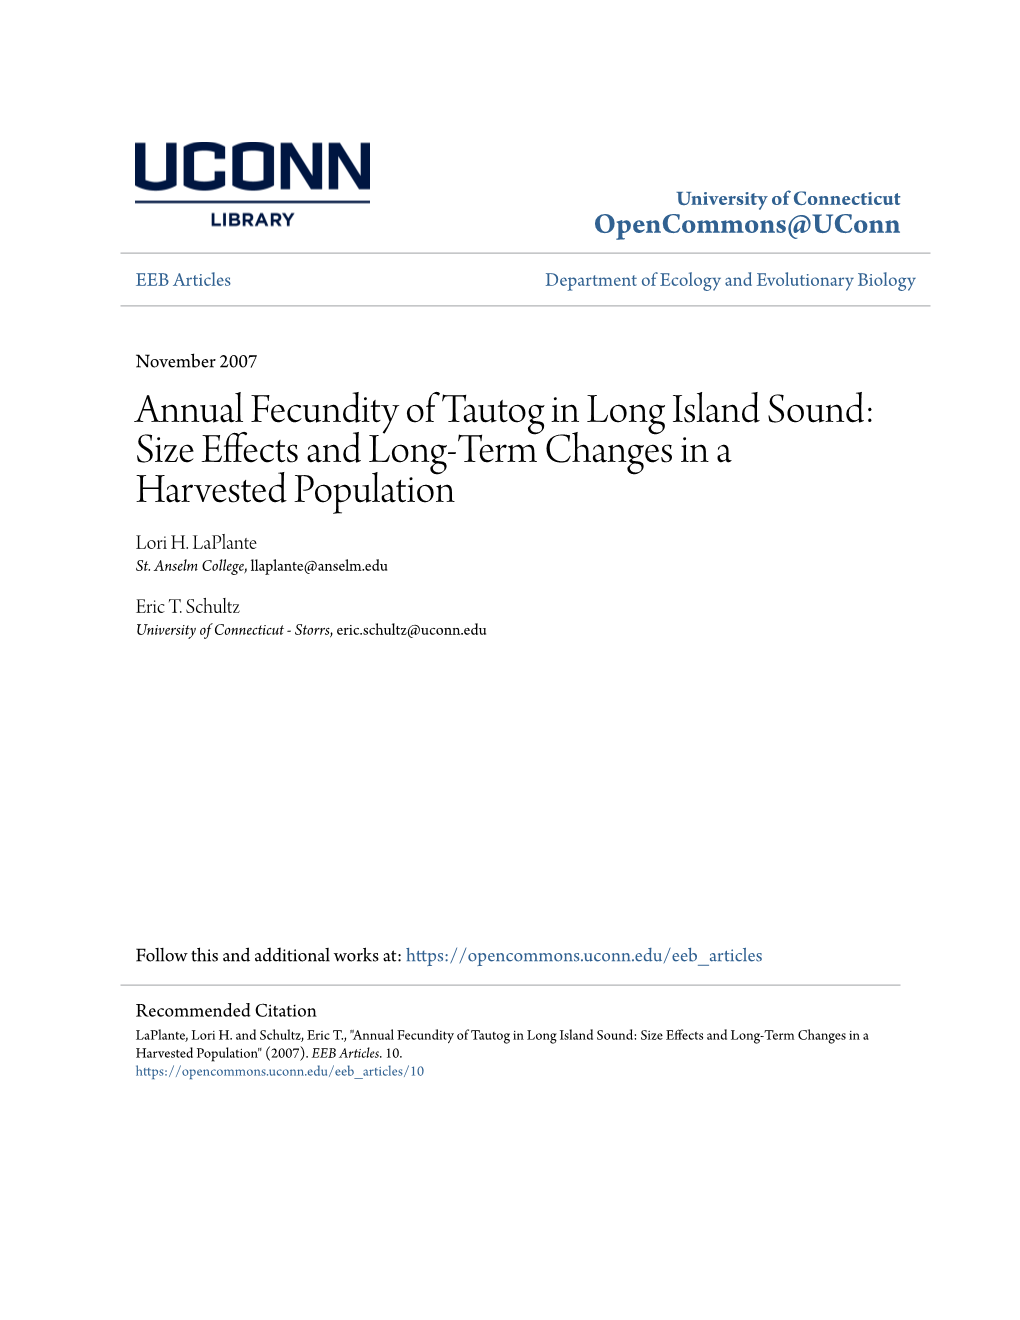 Annual Fecundity of Tautog in Long Island Sound: Size Effects and Long-Term Changes in a Harvested Population Lori H